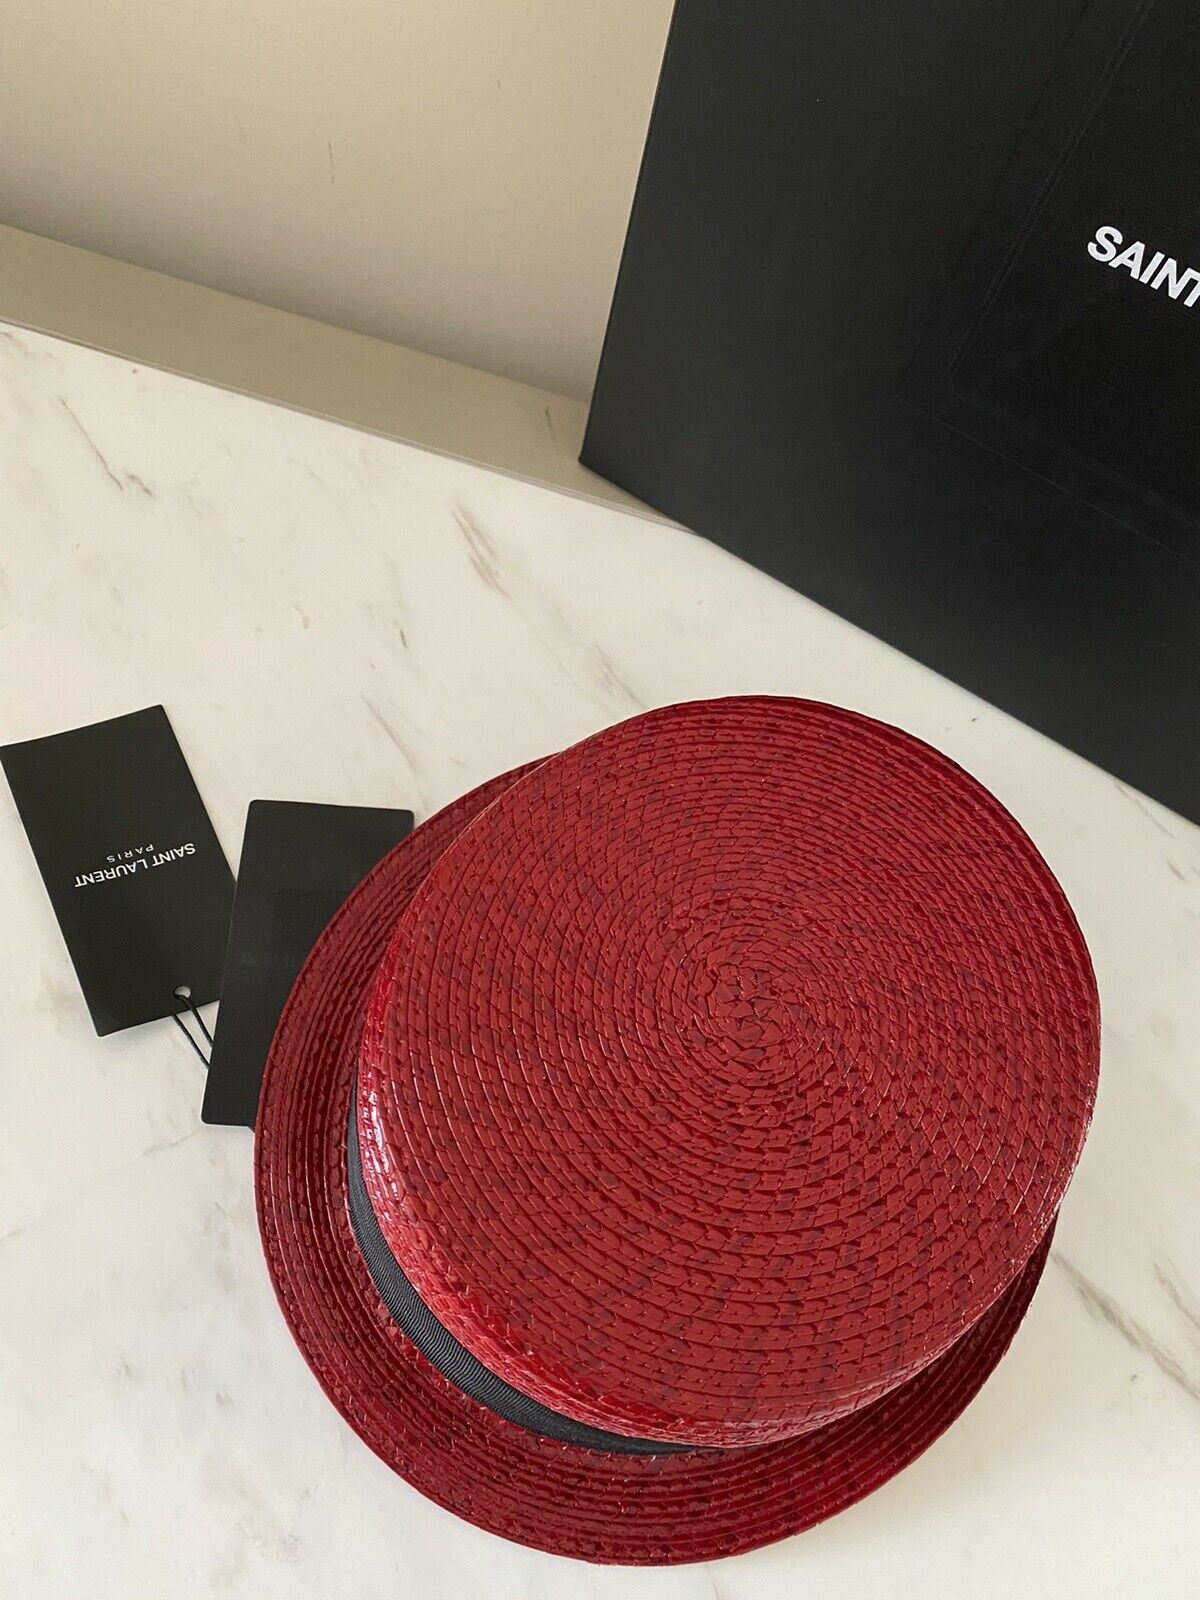 NWT  Saint Laurent Small Boater Hat In Matte Straw Red S Italy